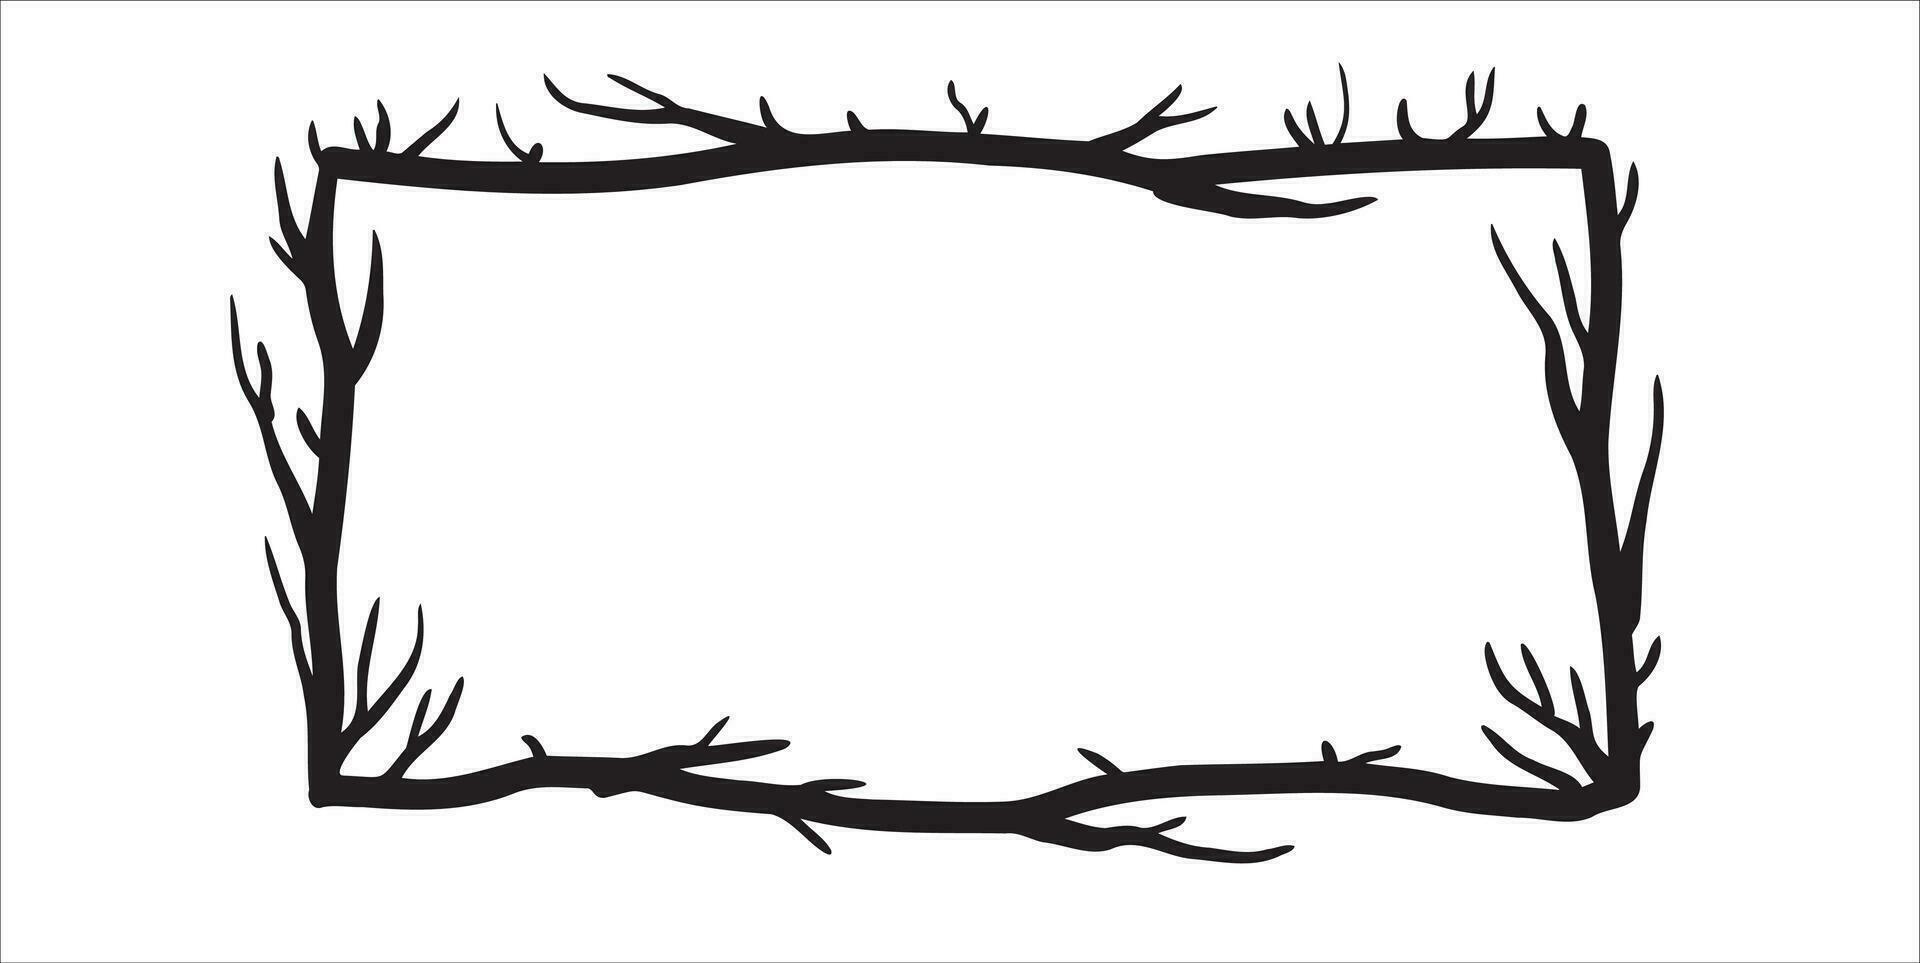 Tree frame, floral square border. Plant and twig decoration isolated on white background. black outline silhouette. decorative vintage scary element. Dark forest concept. vector